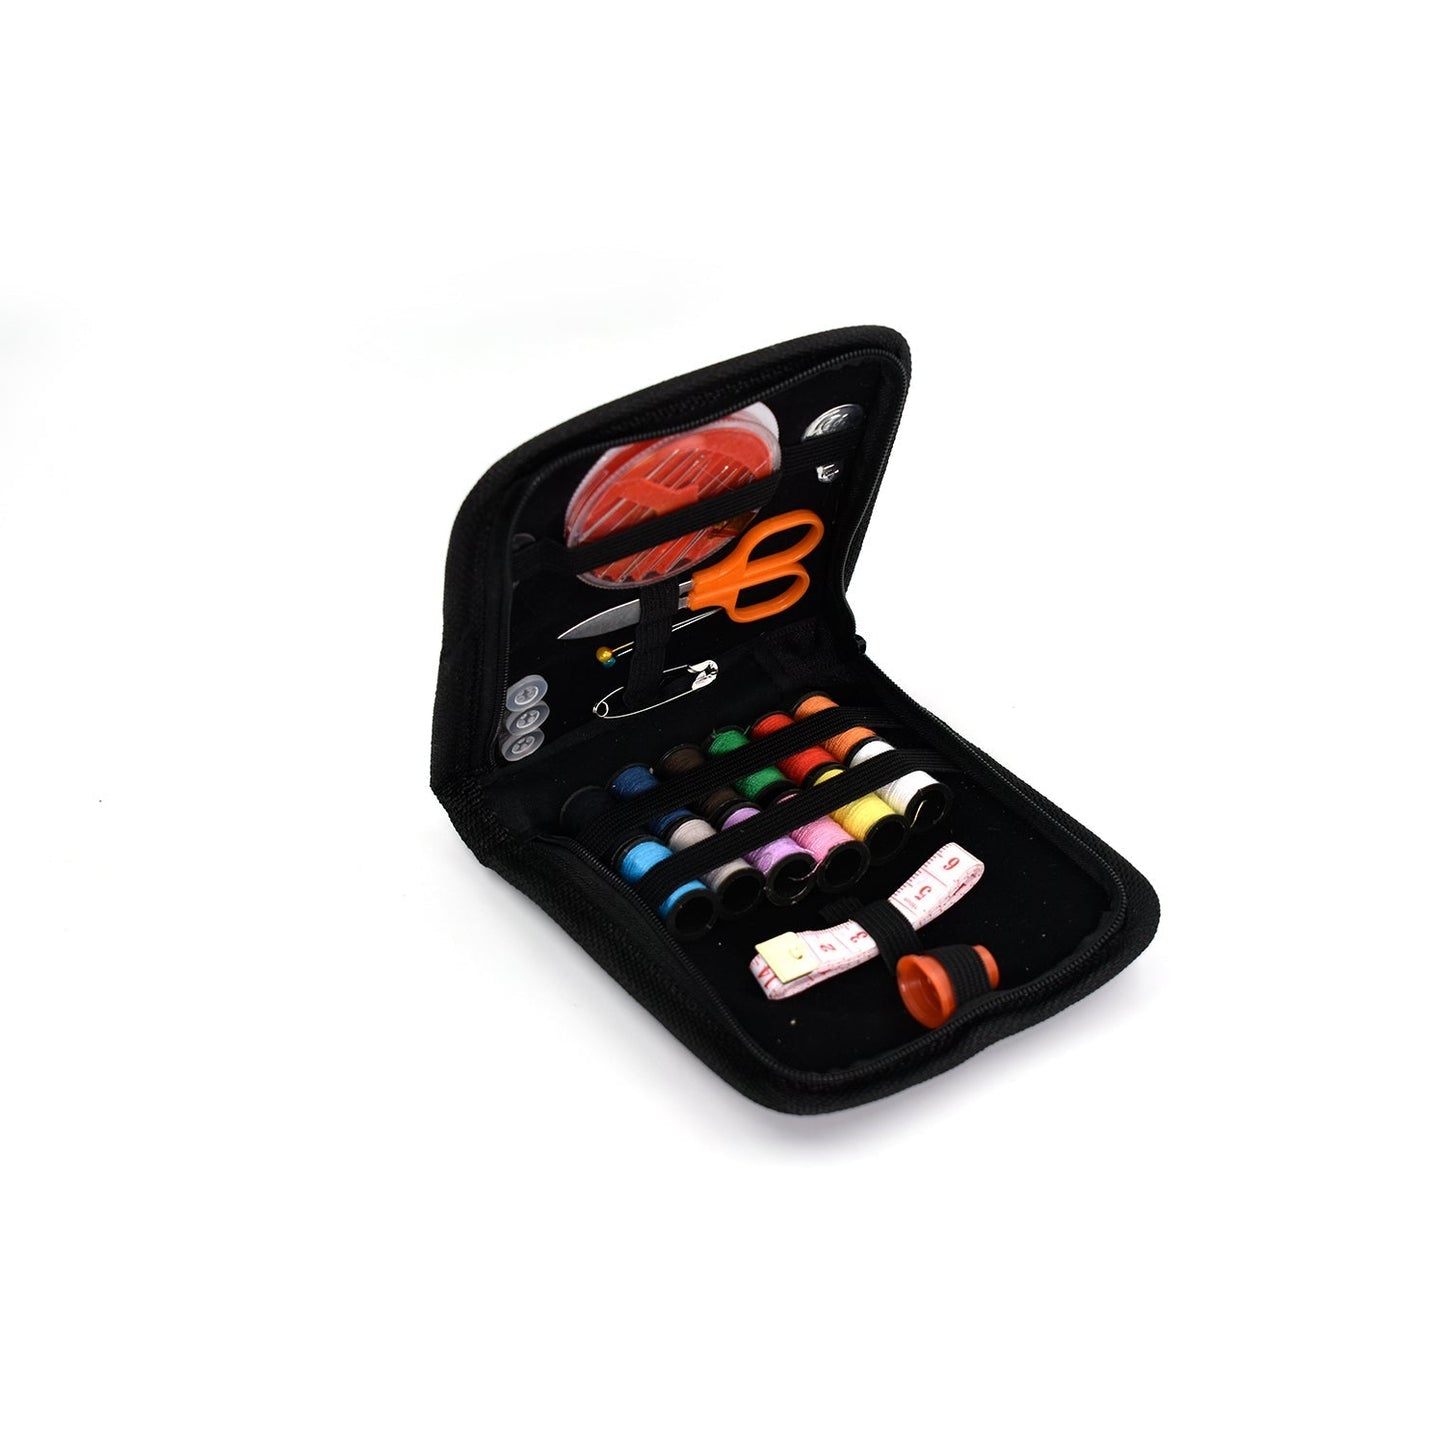 6052A 33Pc Purse Sewing Set For Carrying Various Sewing Items And Stuffs In It.